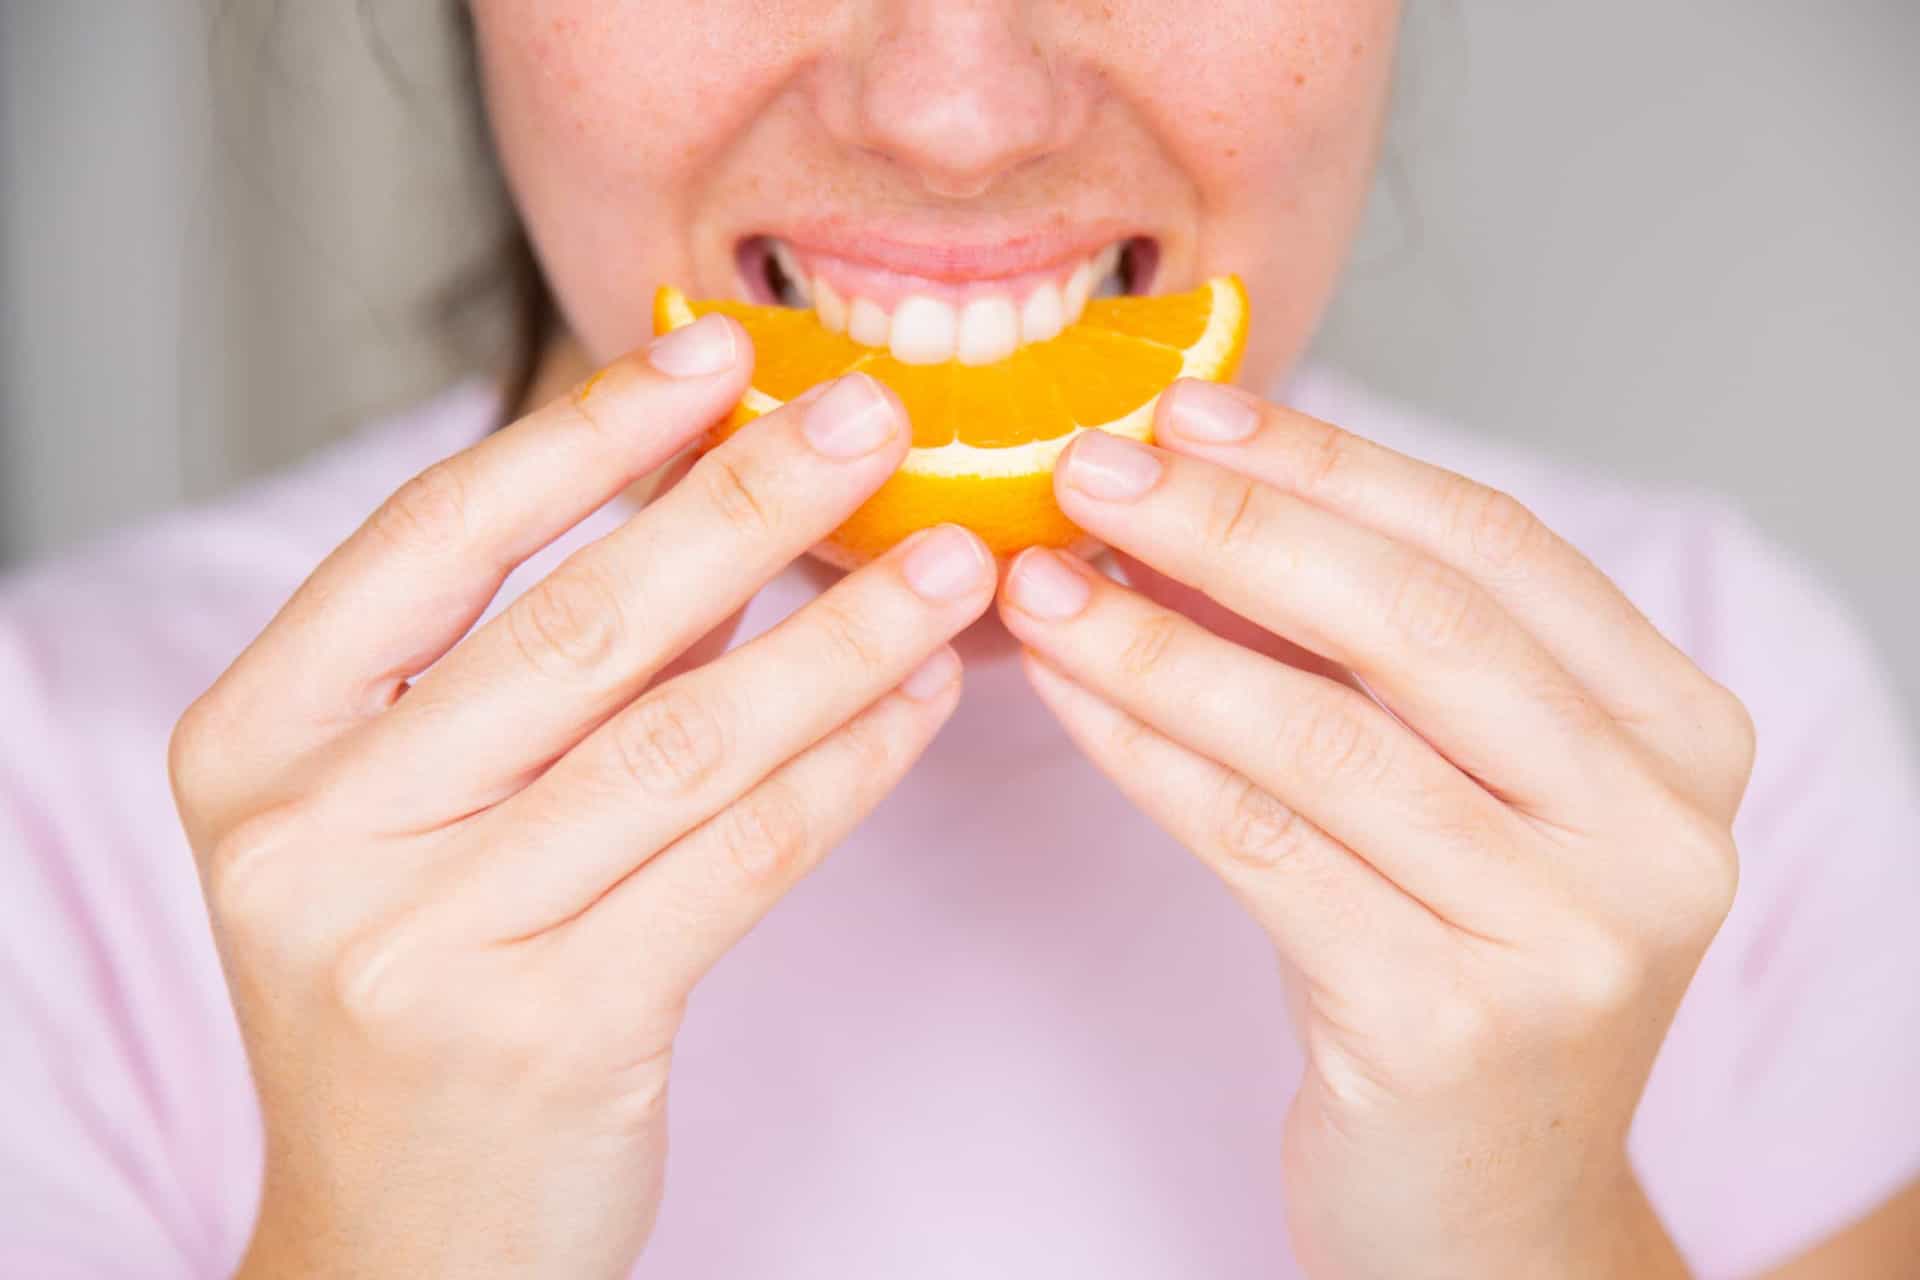 <p>Consuming citrus fruits just before your appointment is also not a good idea. This is because this can temporarily weaken your tooth enamel.</p><p>You may also like:<a href="https://www.starsinsider.com/n/489607?utm_source=msn.com&utm_medium=display&utm_campaign=referral_description&utm_content=516746en-en"> The biggest unsolved mysteries from each state</a></p>